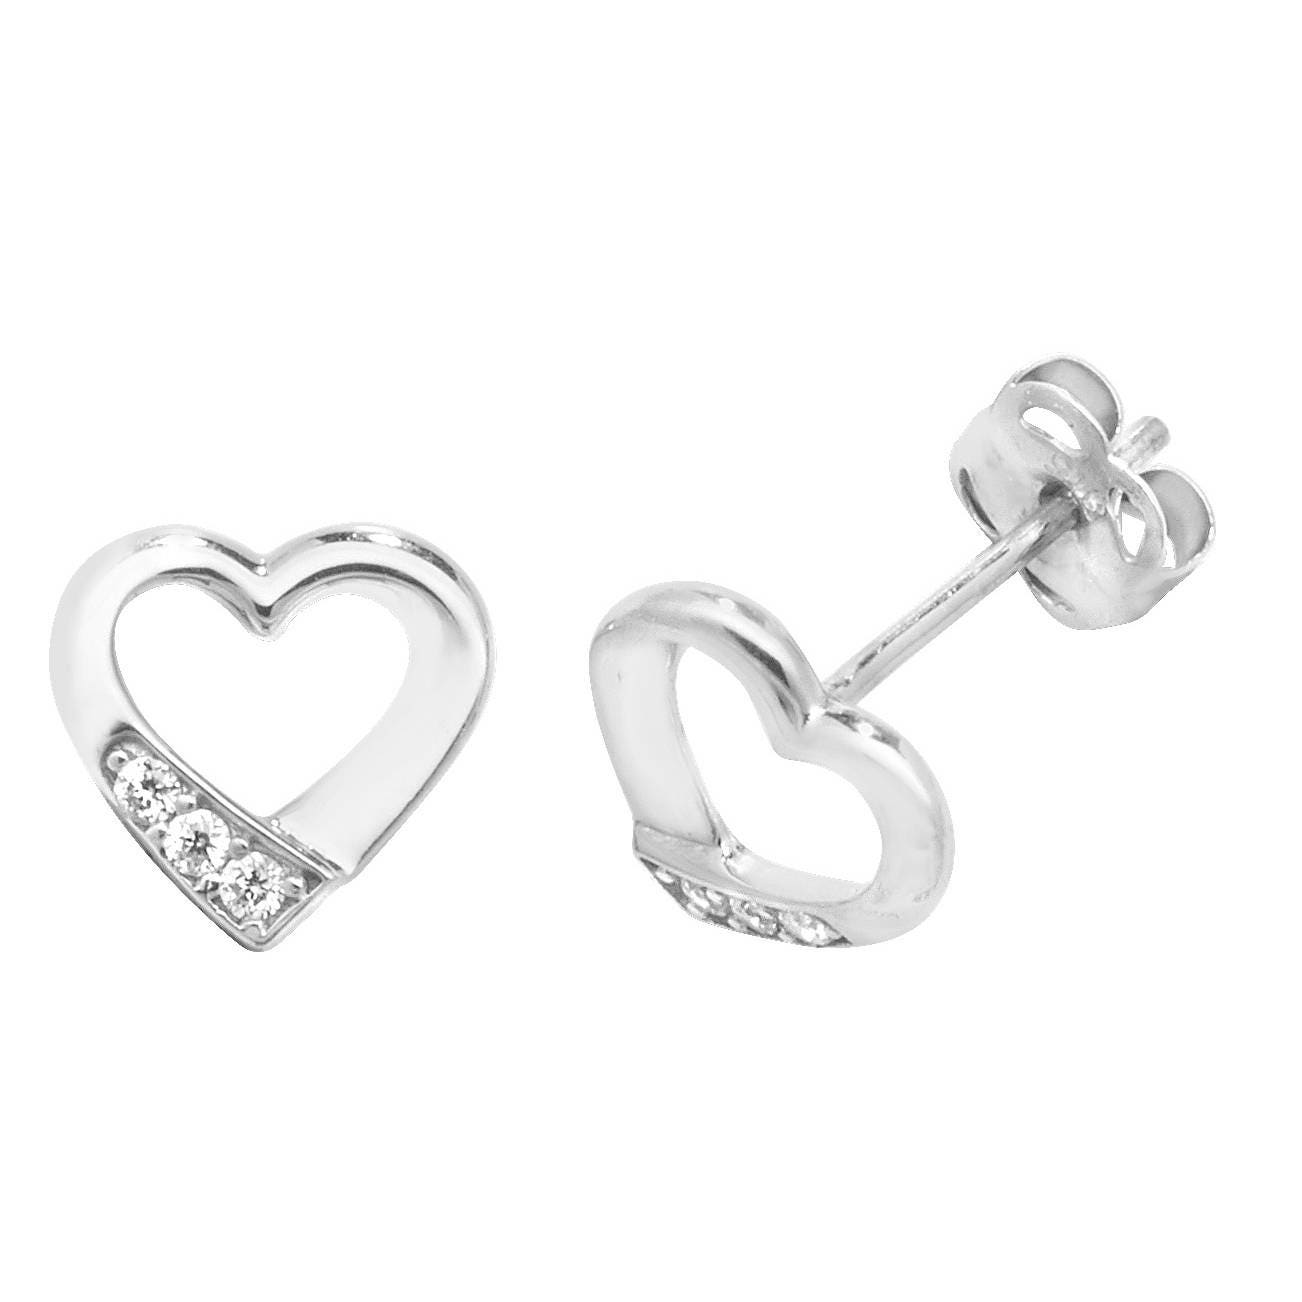 9ct White Gold Filled Womens Stylish Stud Earrings with White CZ Crystals 9K GF 